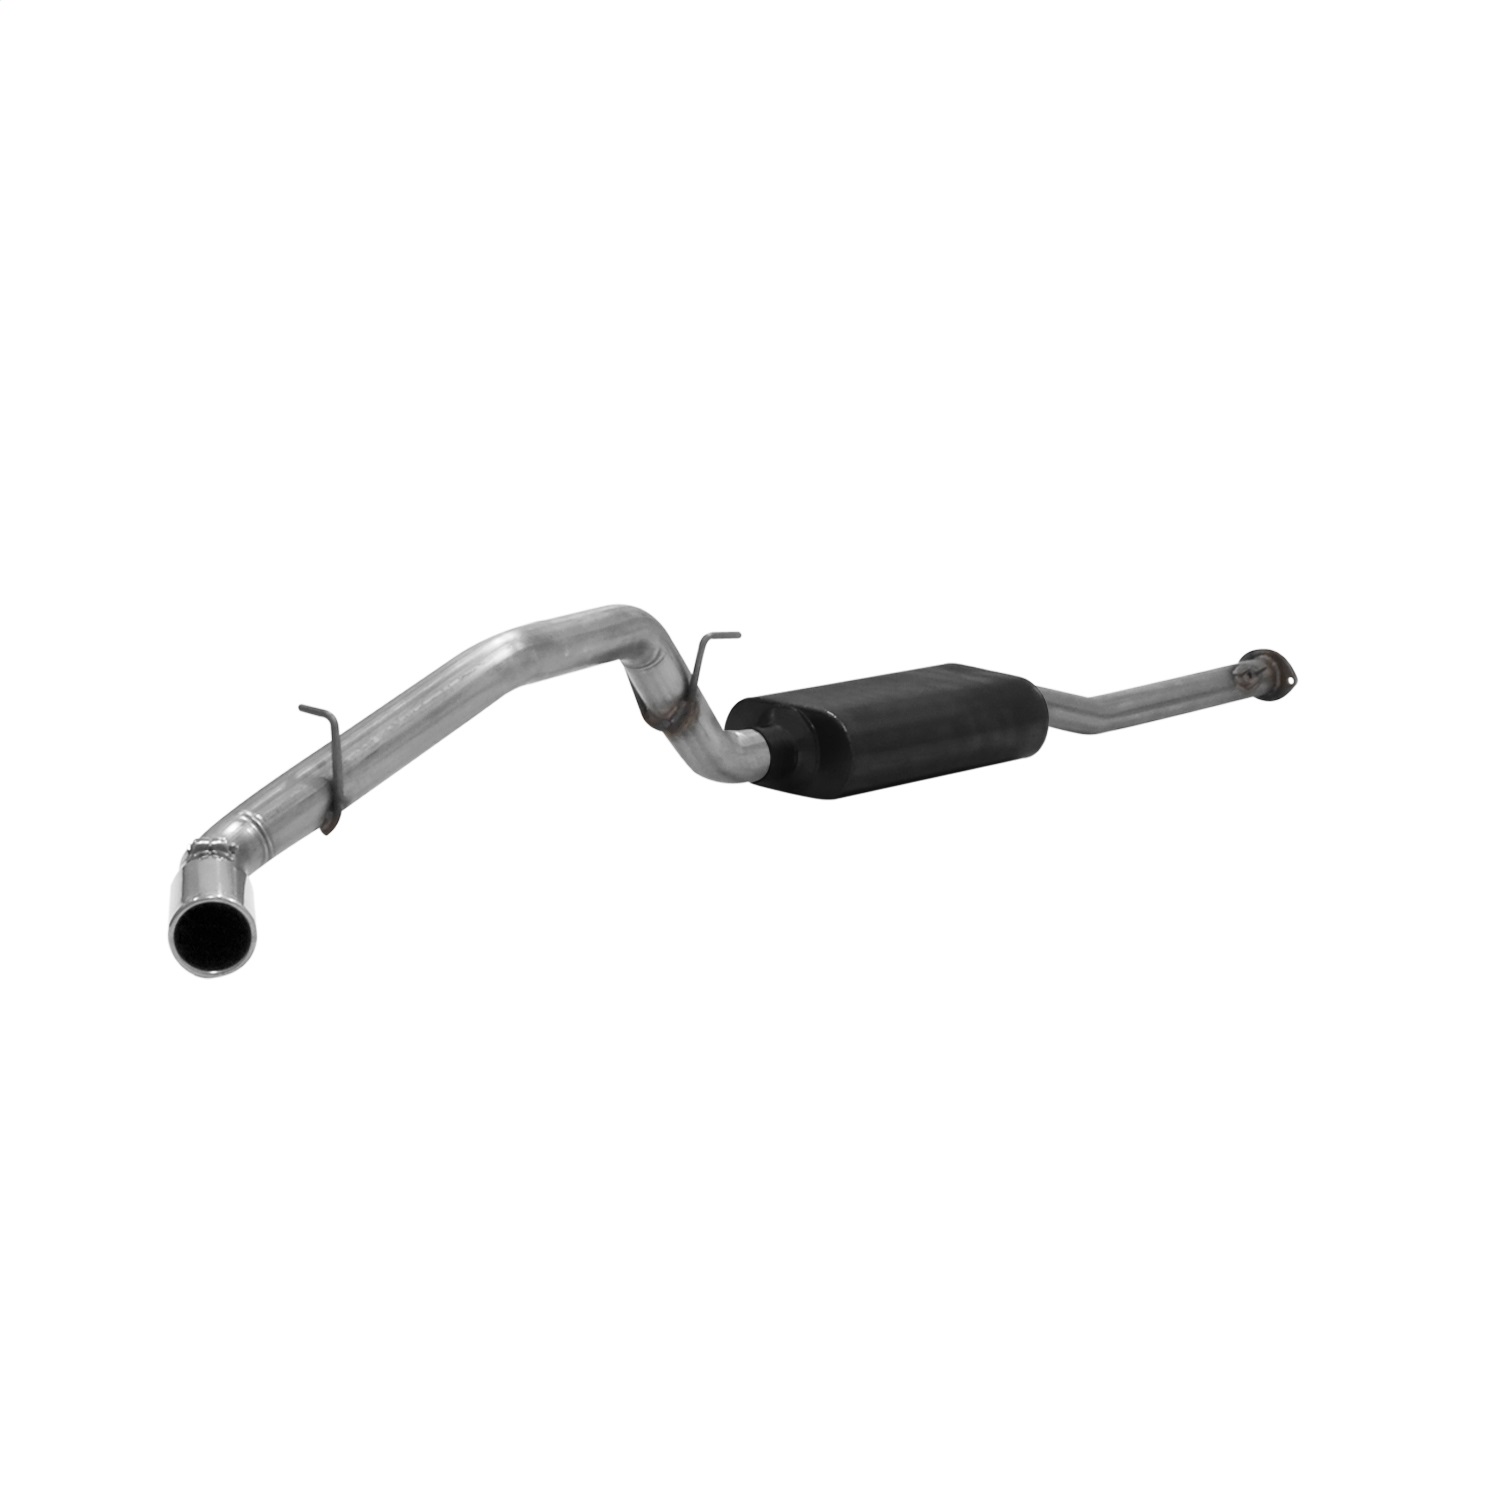 Flowmaster Flowmaster 817519 American Thunder Cat Back Exhaust System Fits 00-04 Tacoma